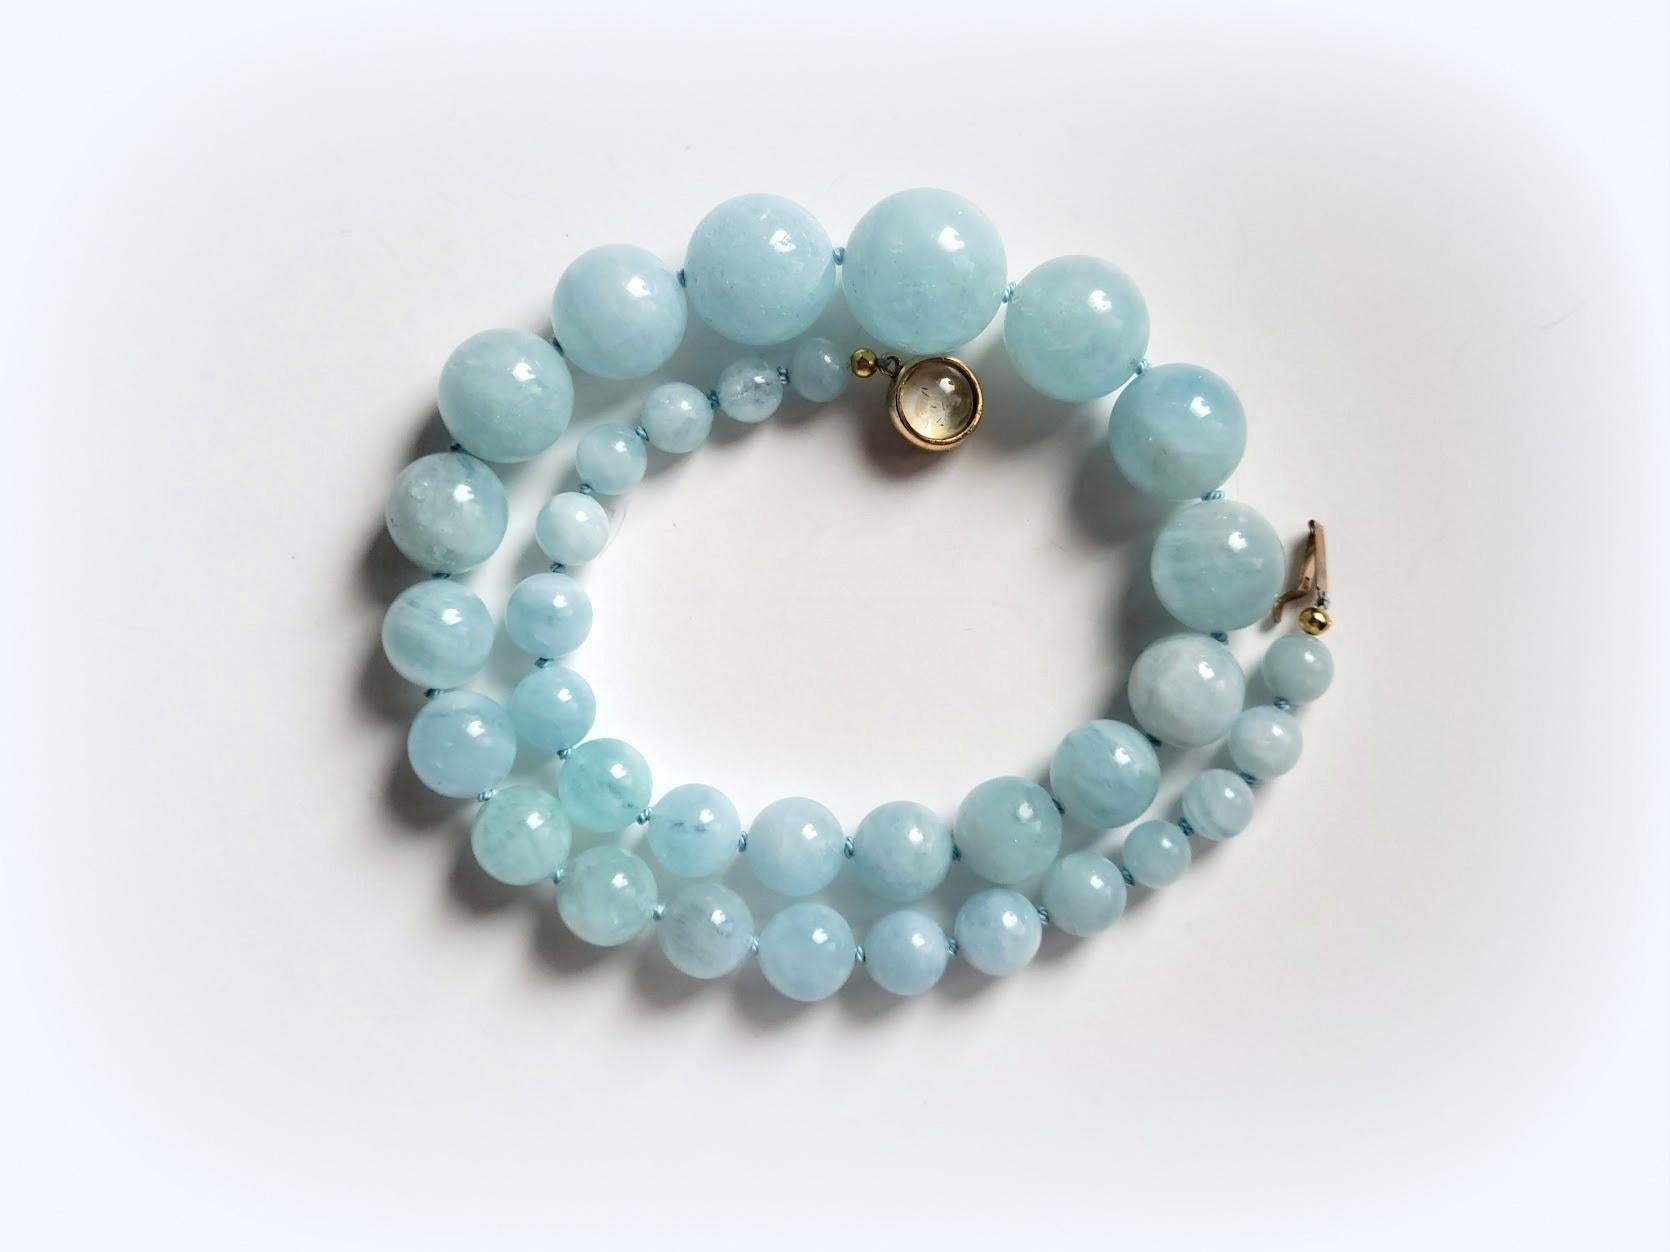 The length of the necklace is 18.5 inches (47 cm). 
The size of the smooth round beads is from 8 mm to 19 mm. 
The color of the beads is a soft shade of blue sky. A very gentle soft pastel color! Beautiful statement beads of Blue Aquamarine!